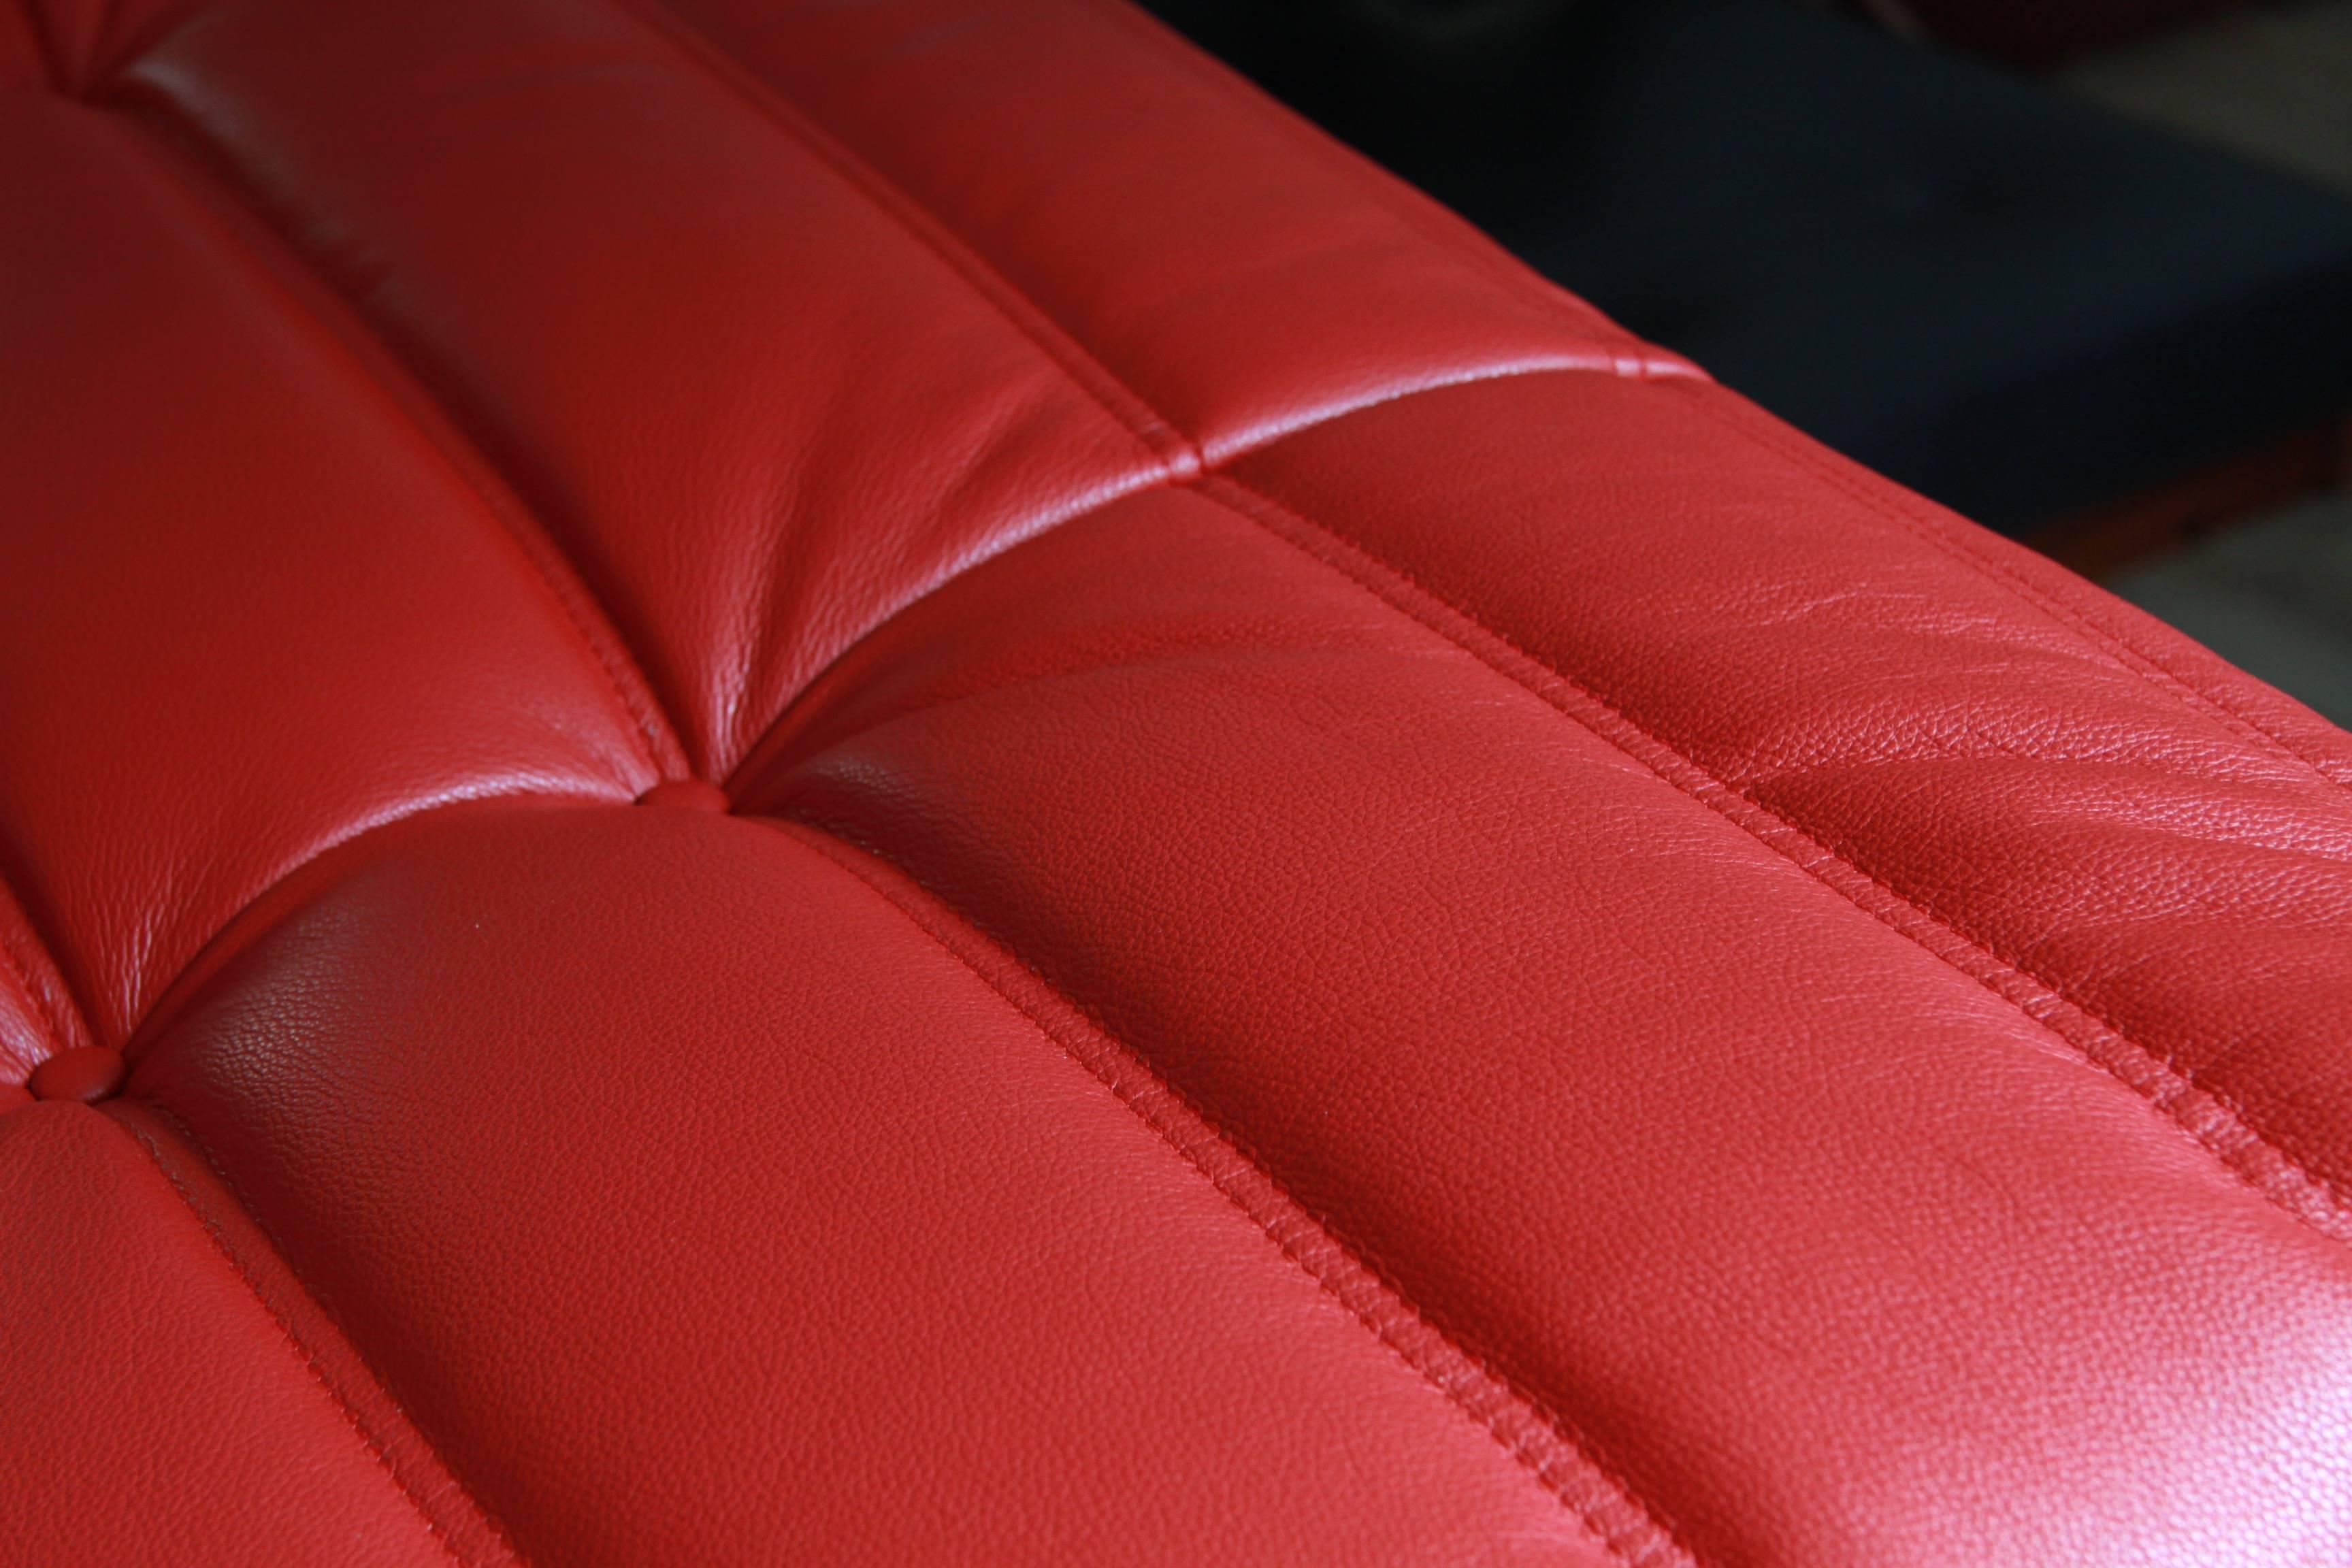 Late 20th Century Red Leather Two-Seat Togo Sofa by Michel Ducaroy for Ligne Roset